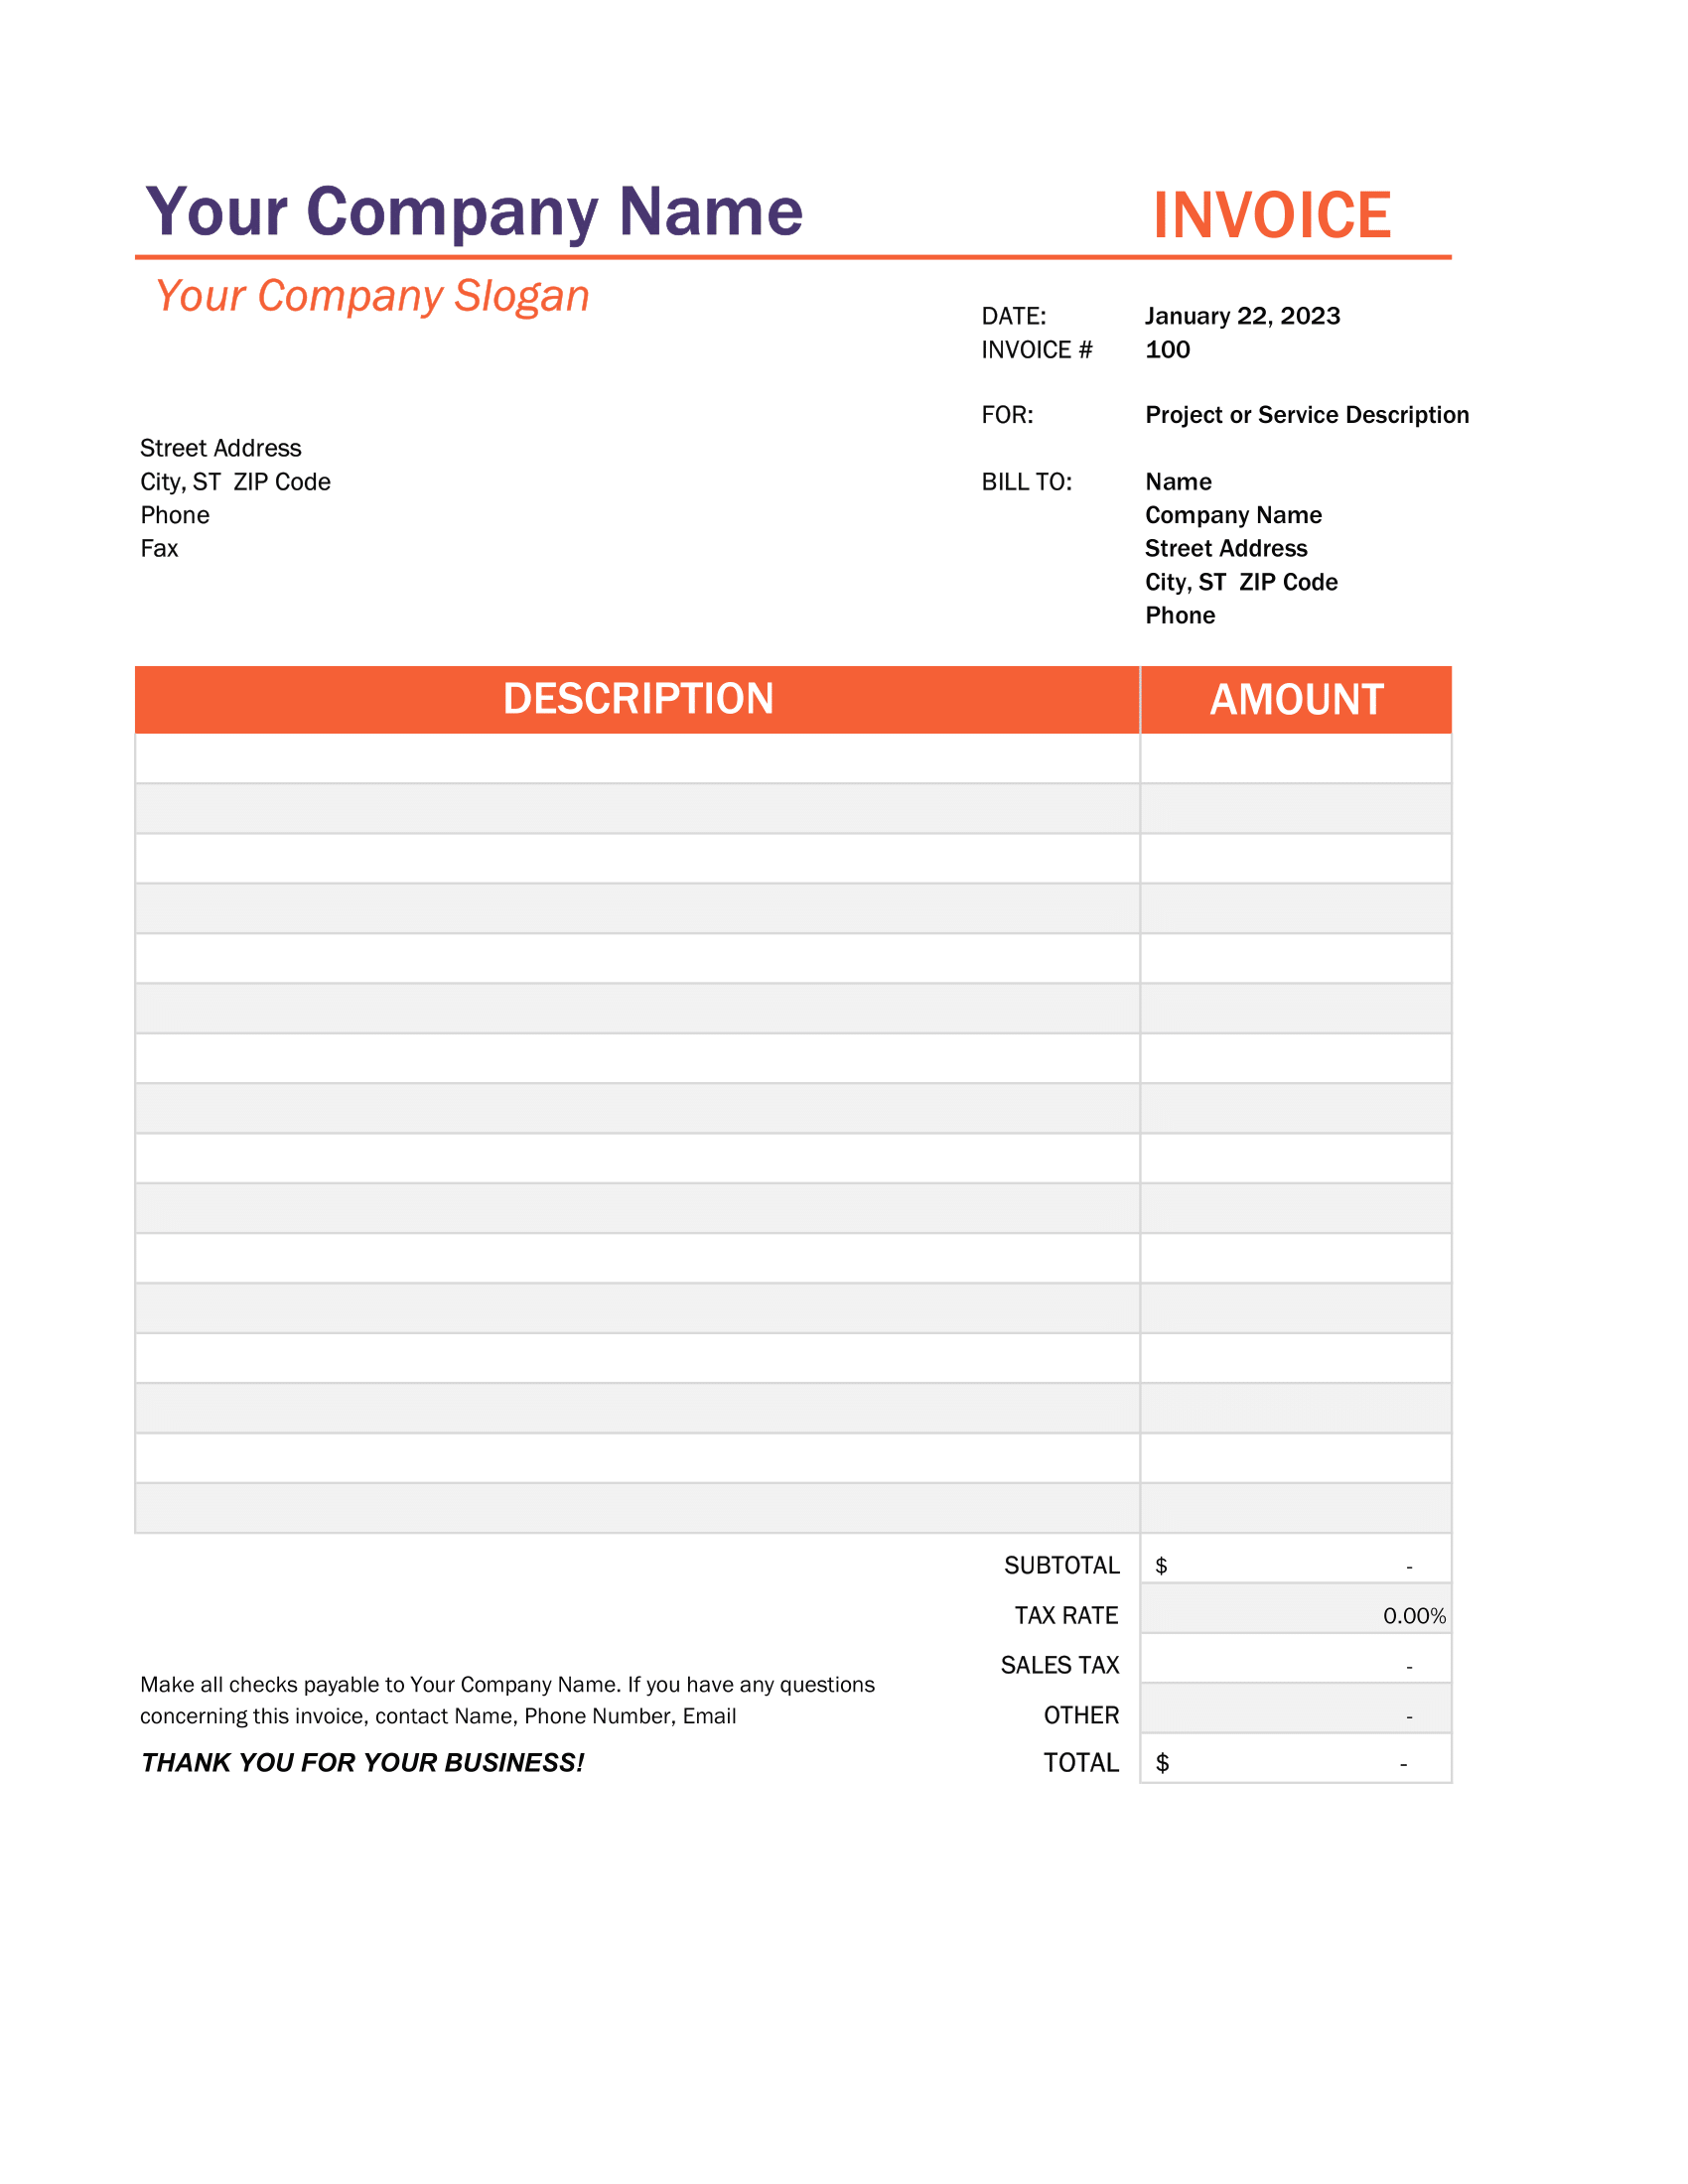 Invoice with Tax Calculation-1